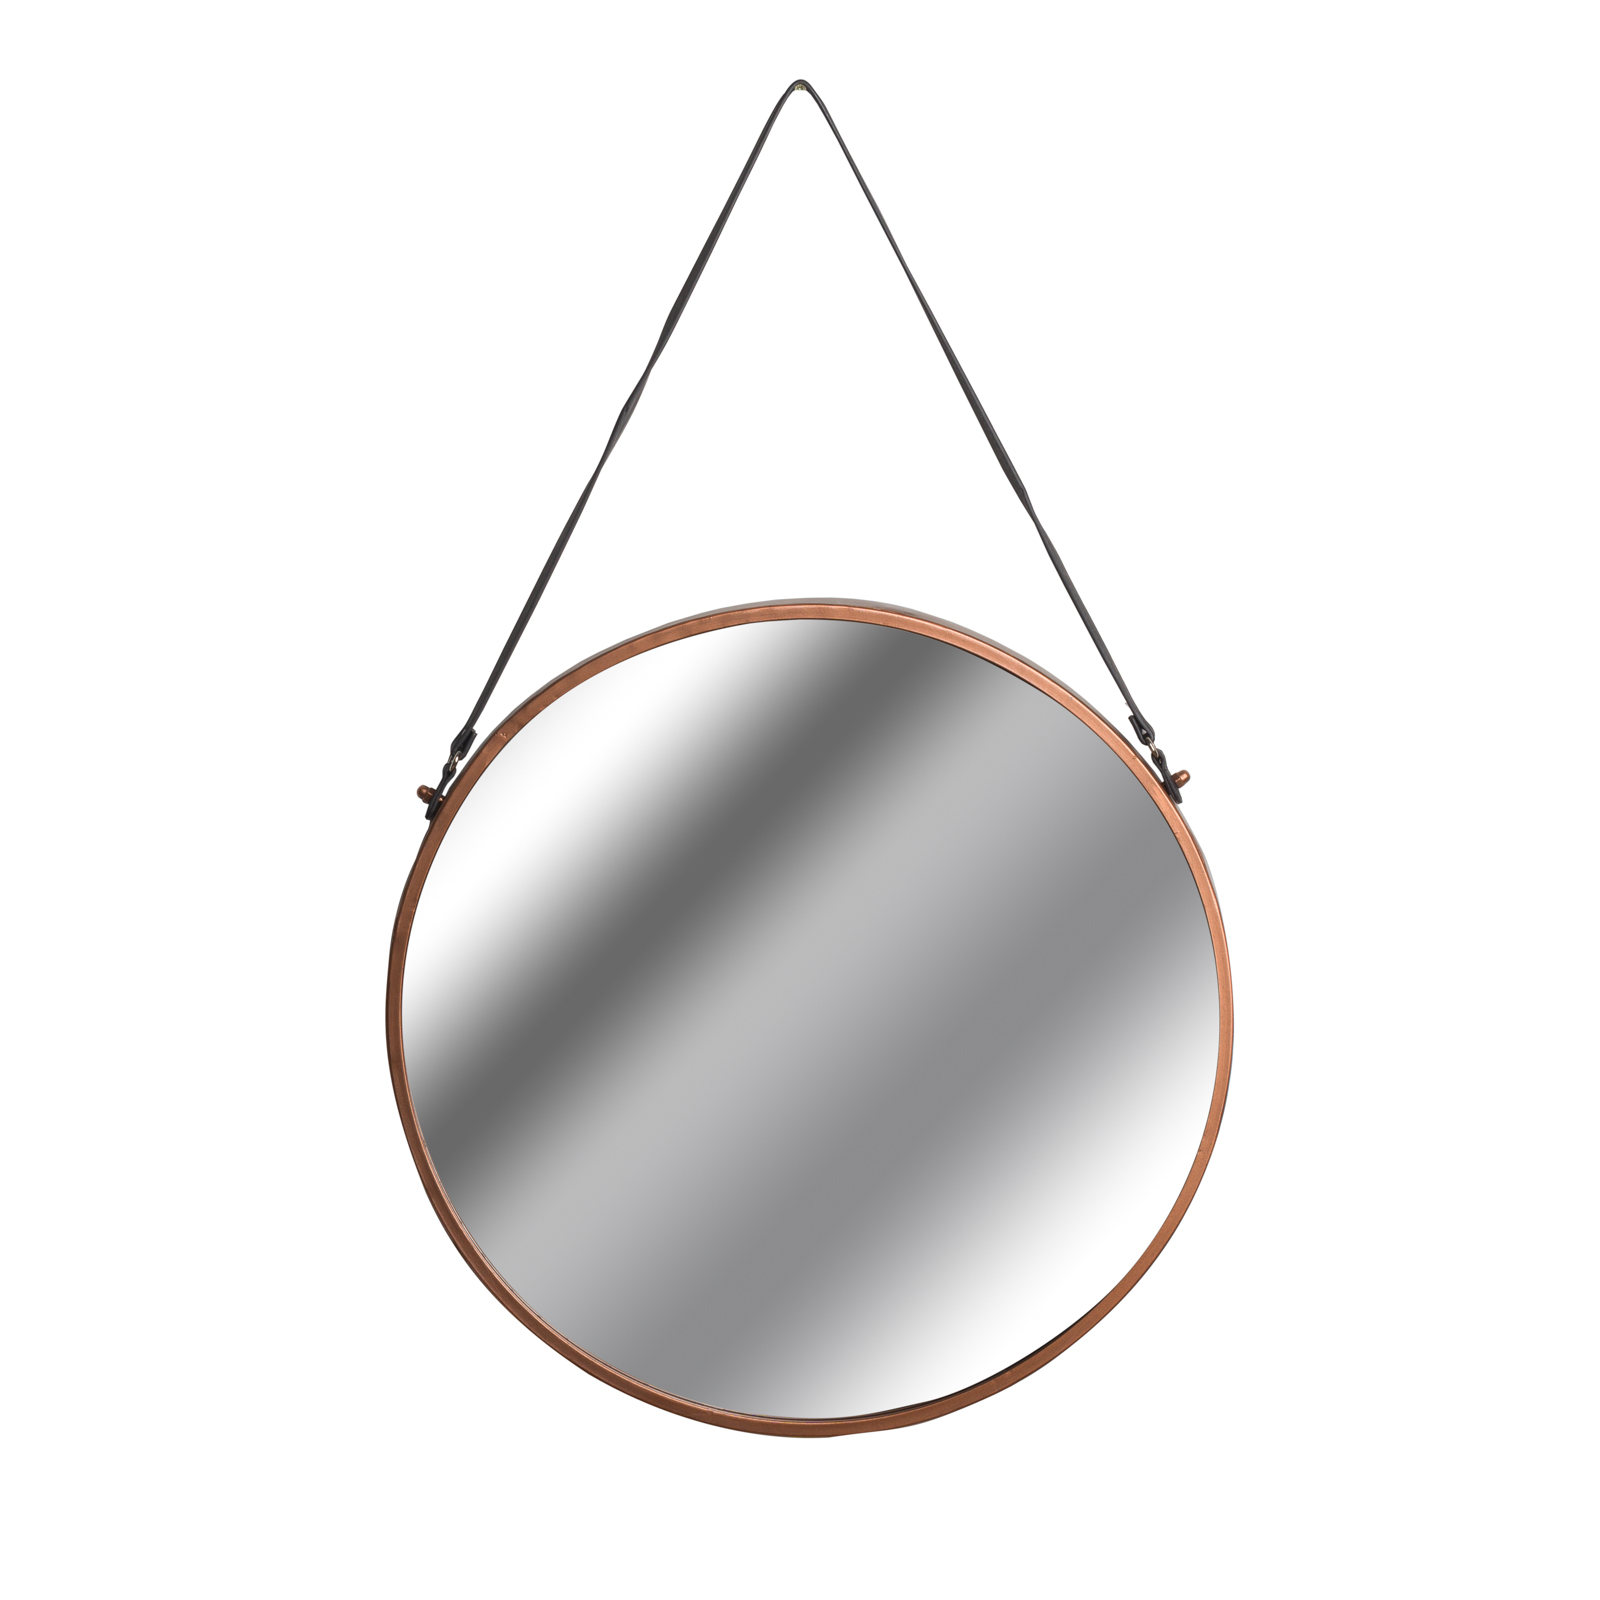 Copper Rimmed Round Hanging Wall Mirror With Black Strap - Image 2